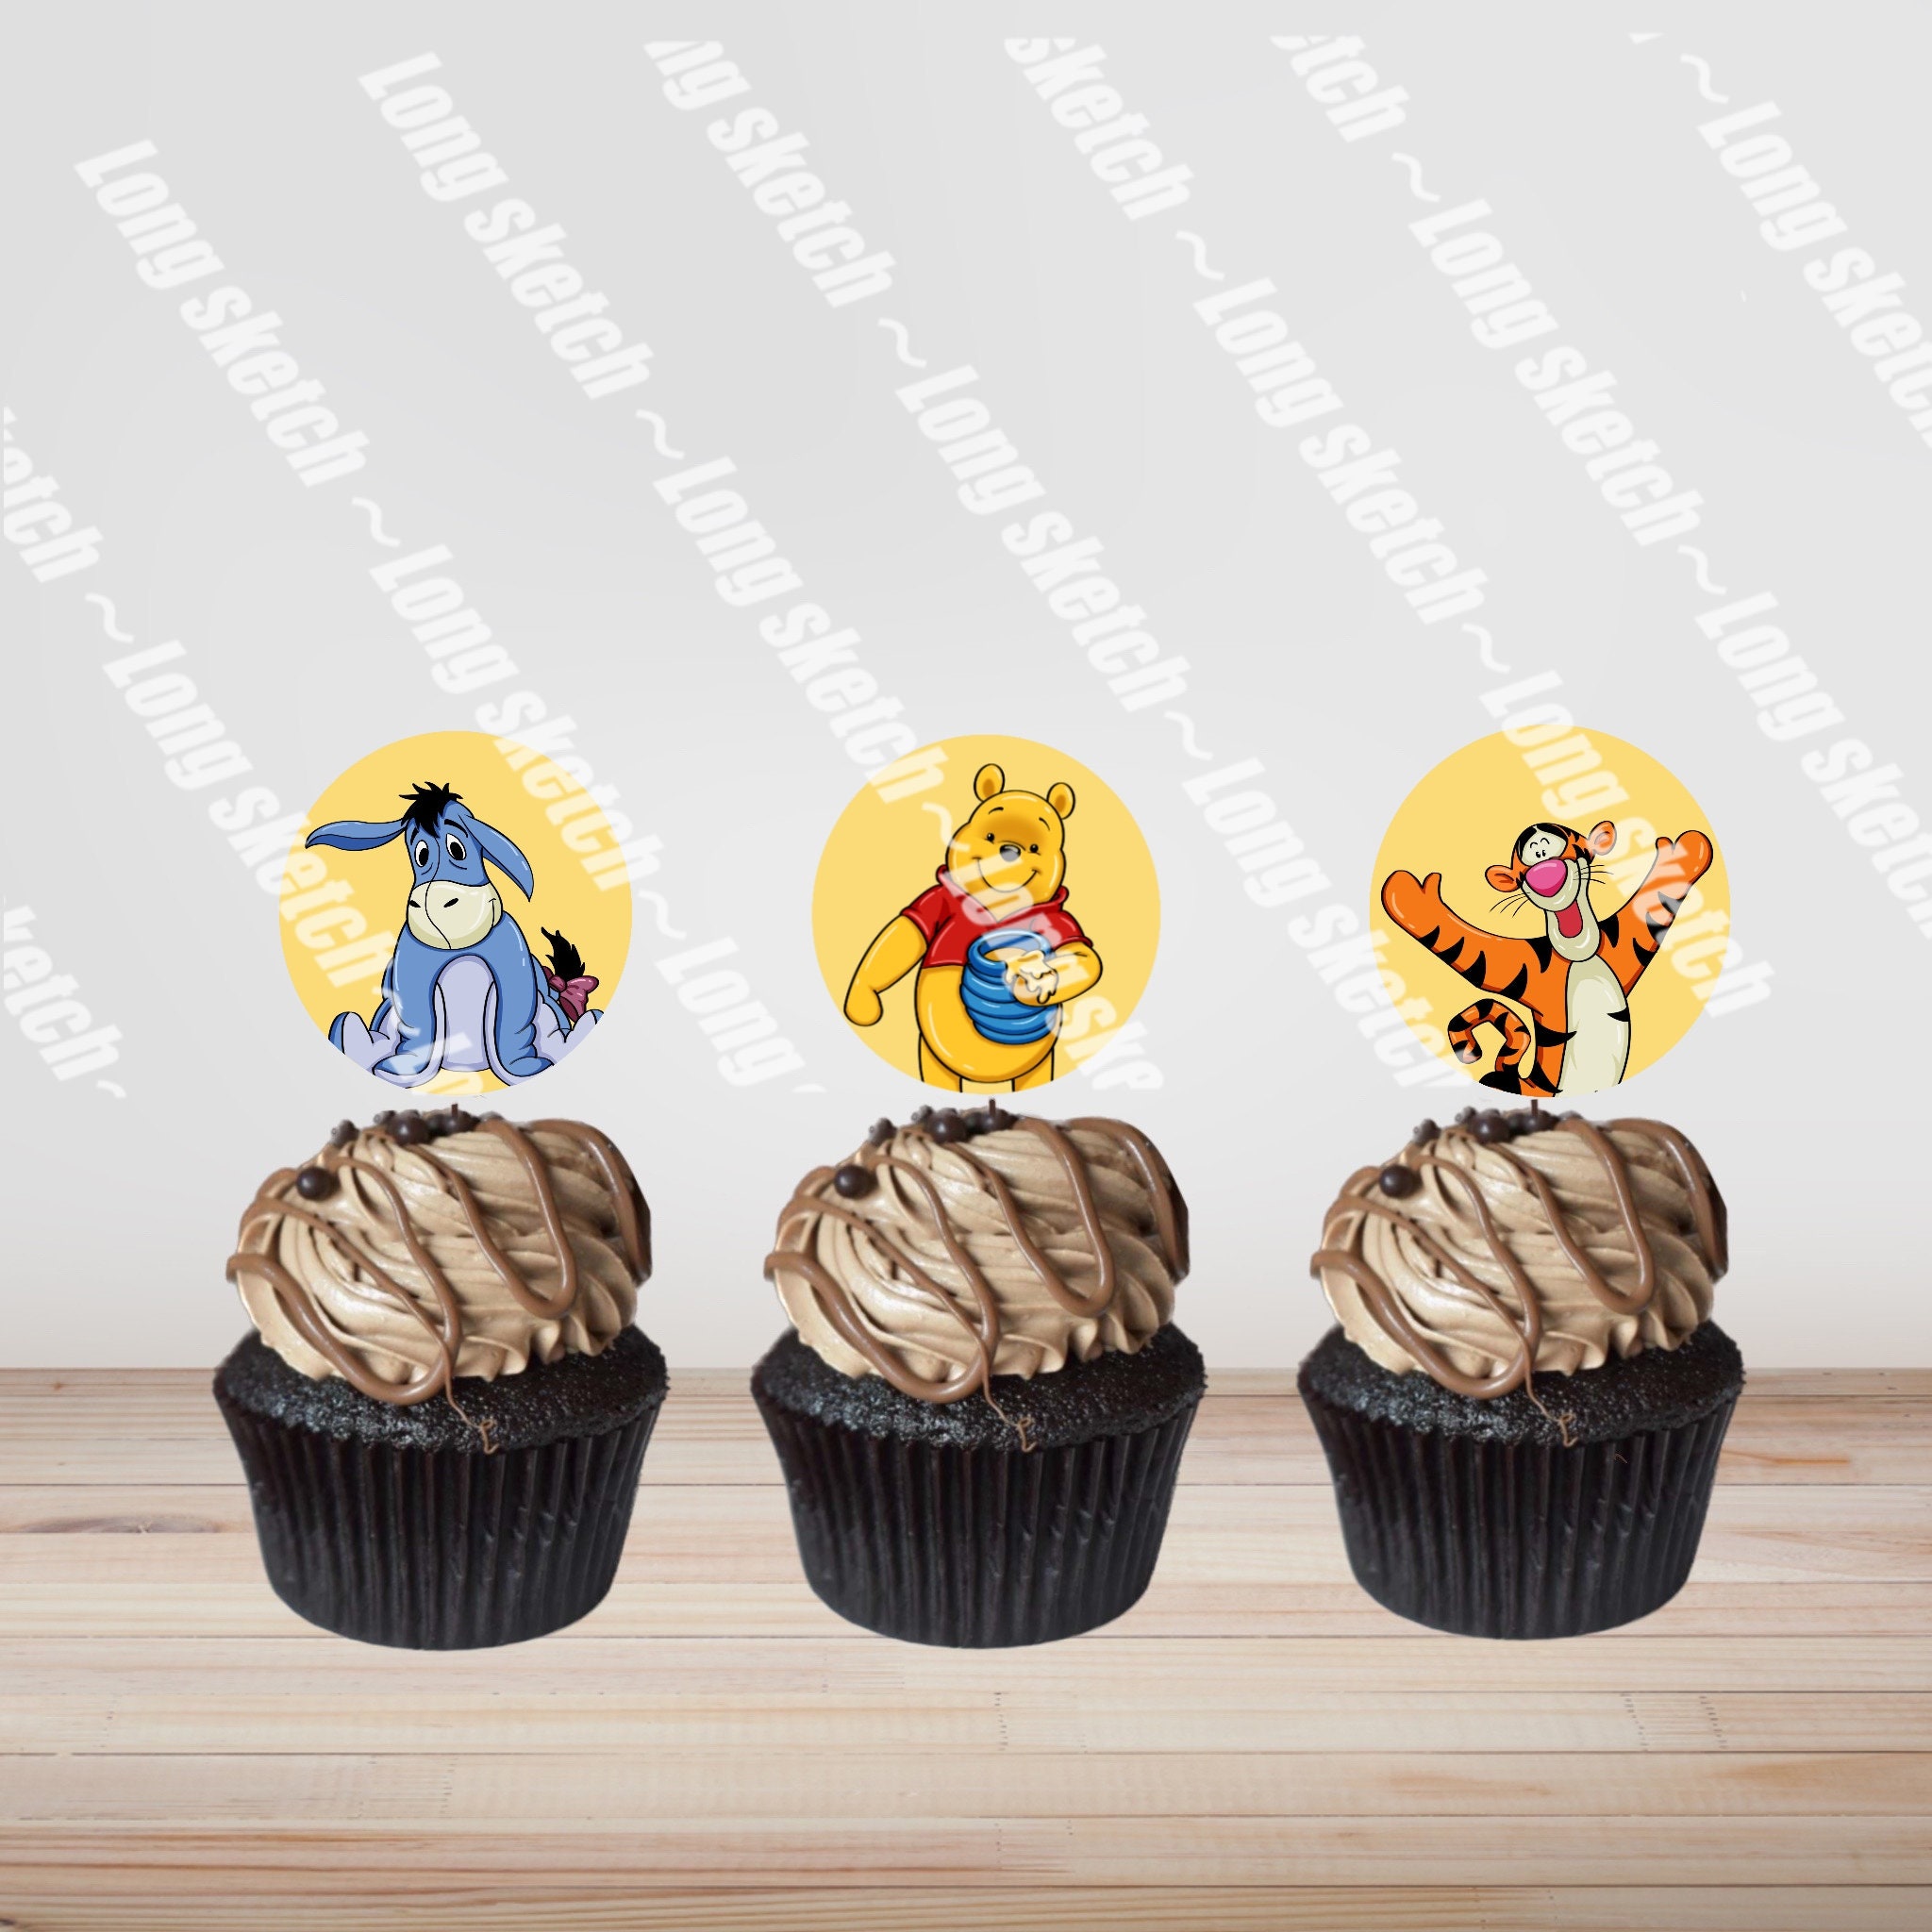 WINNIE THE POOH CUPCAKES TOPPERS - Cami Templates